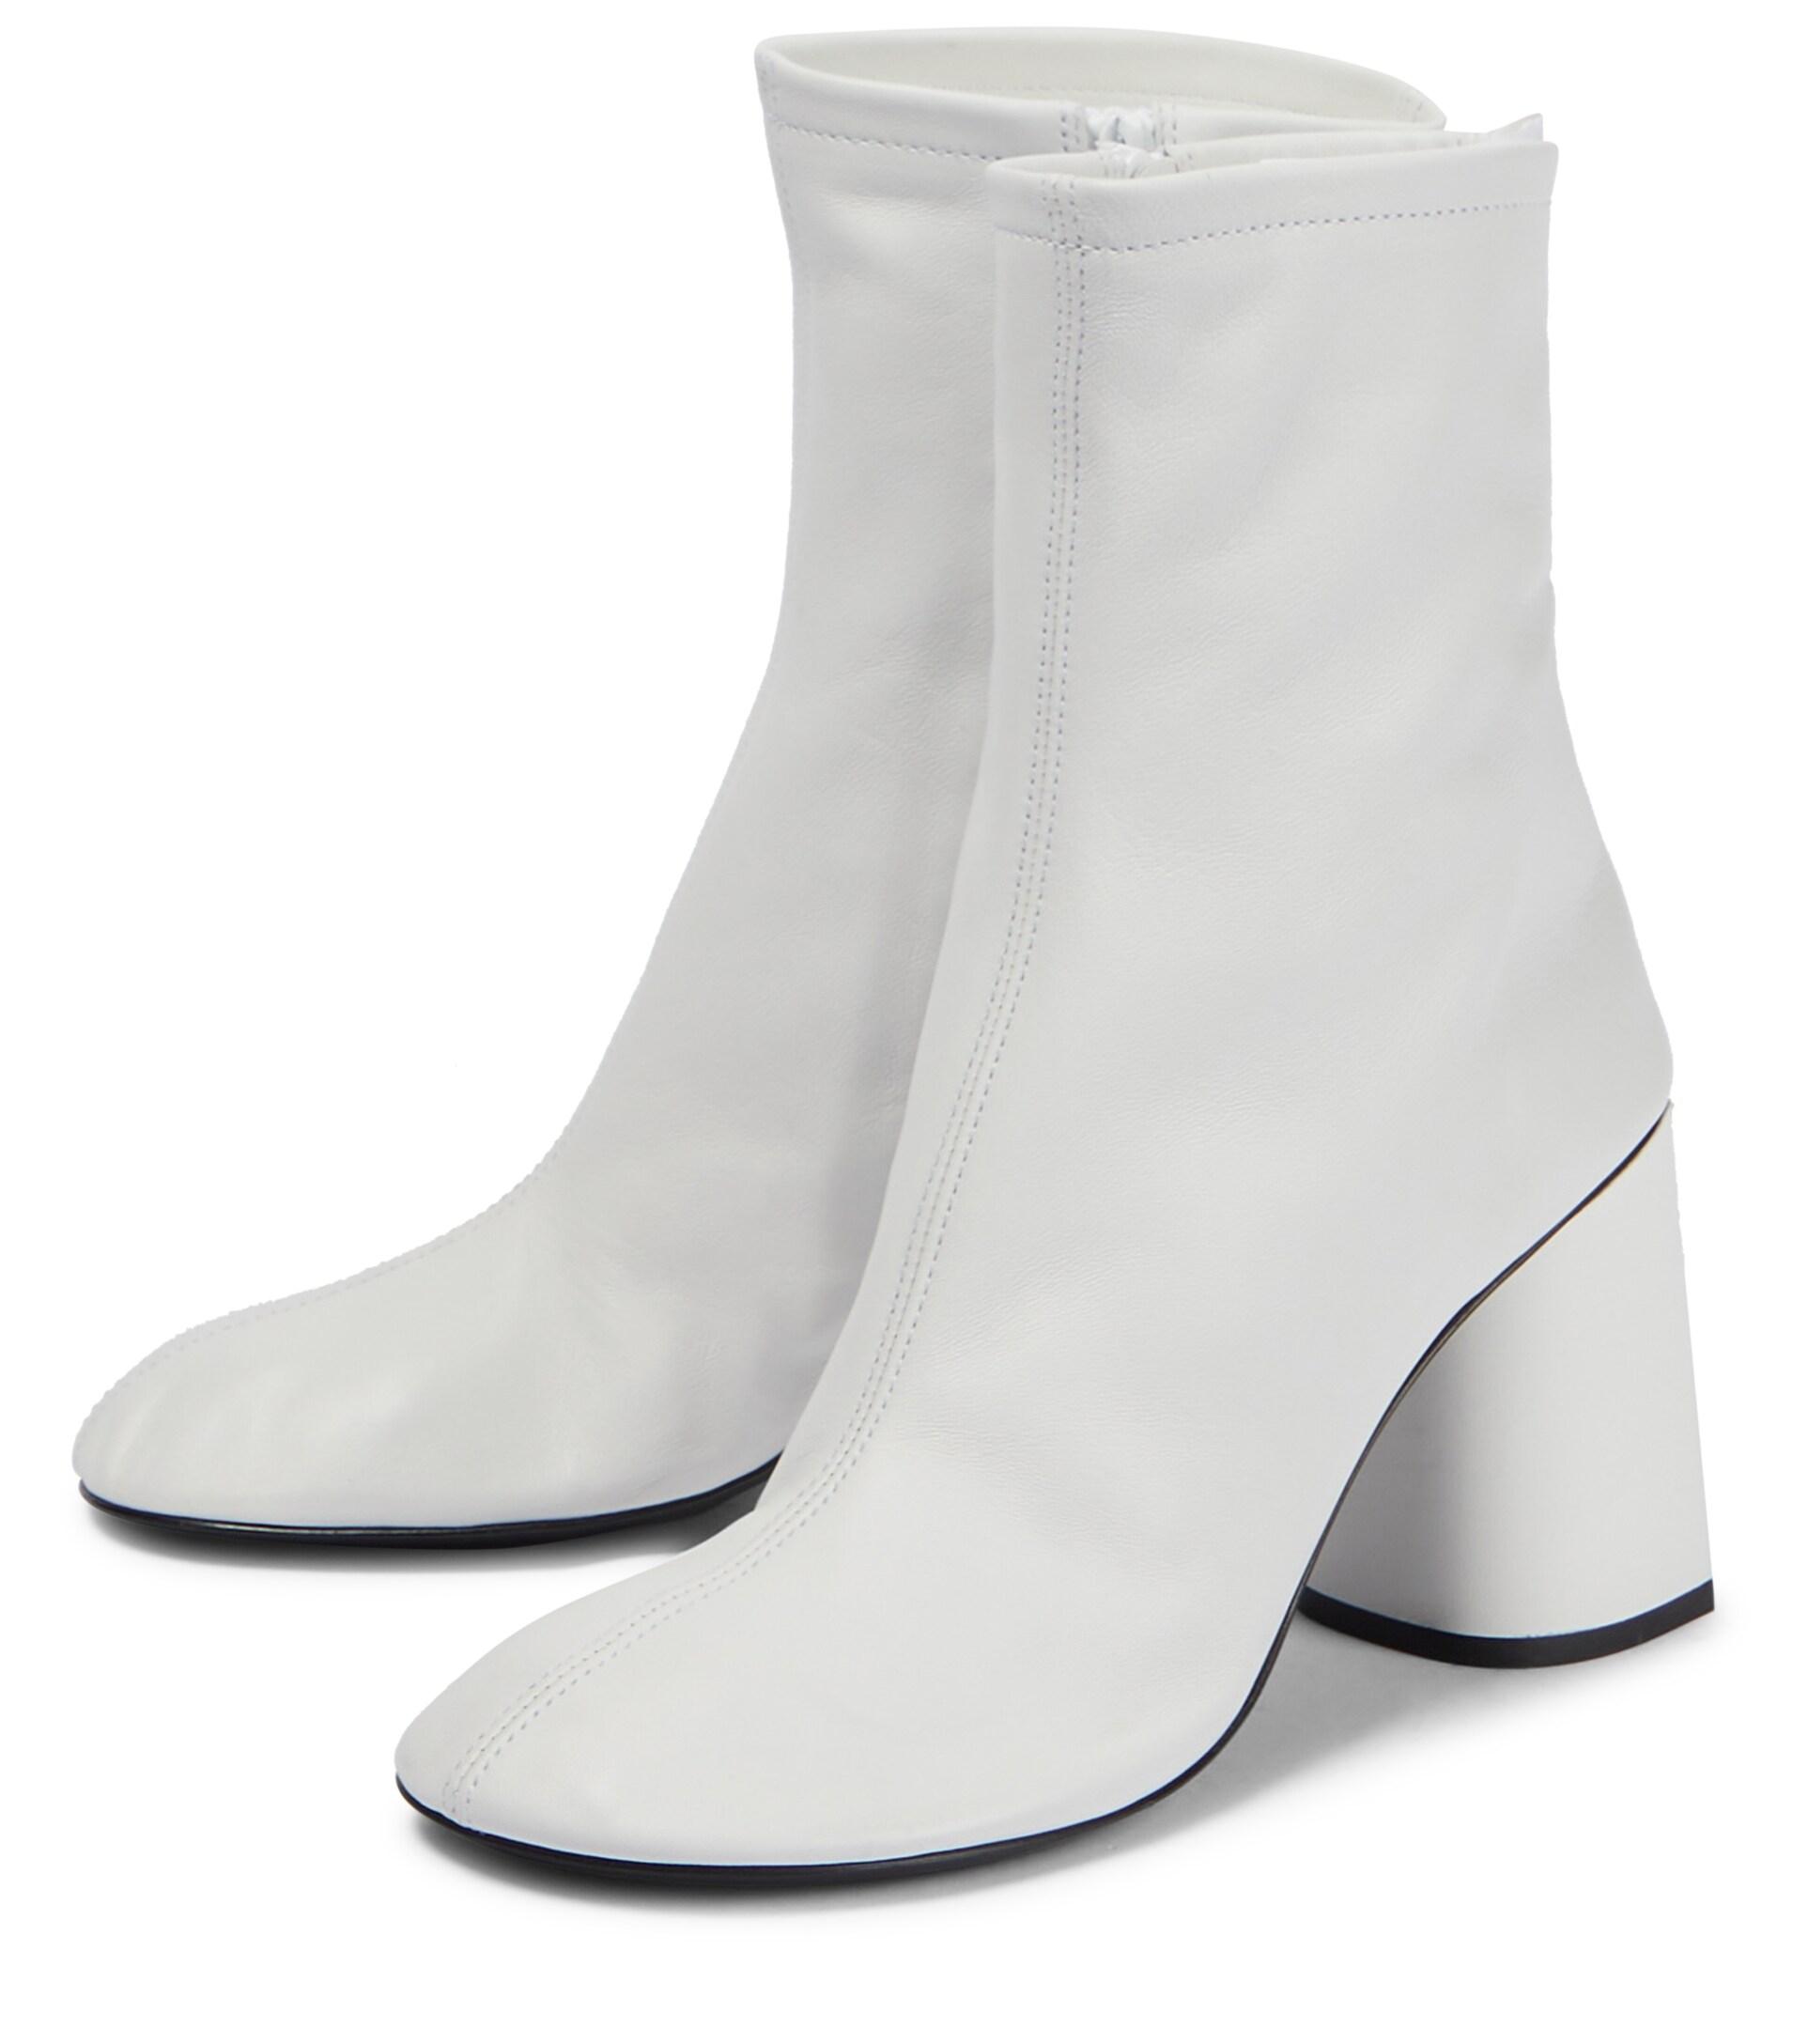 Balenciaga Glove Leather Ankle Boots in White | Lyst